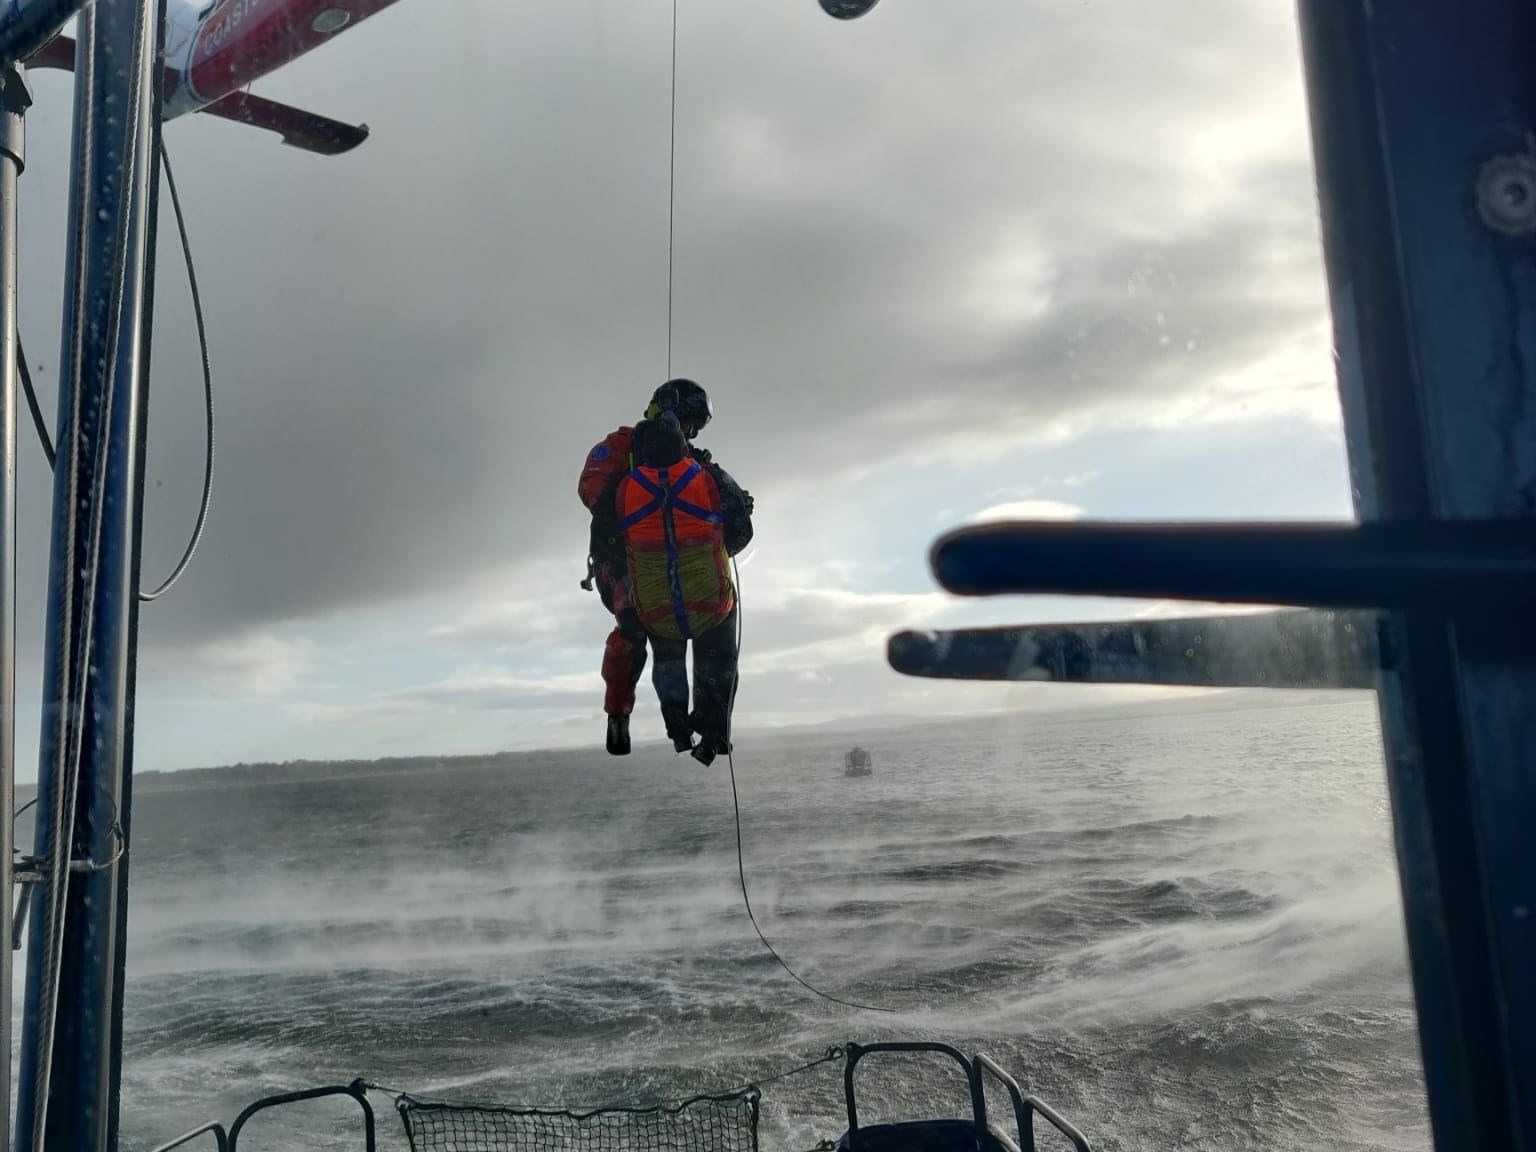 Rescue of man off Chanonry Point by 17 Port Maritime Regiment, Royal Logistics Corps